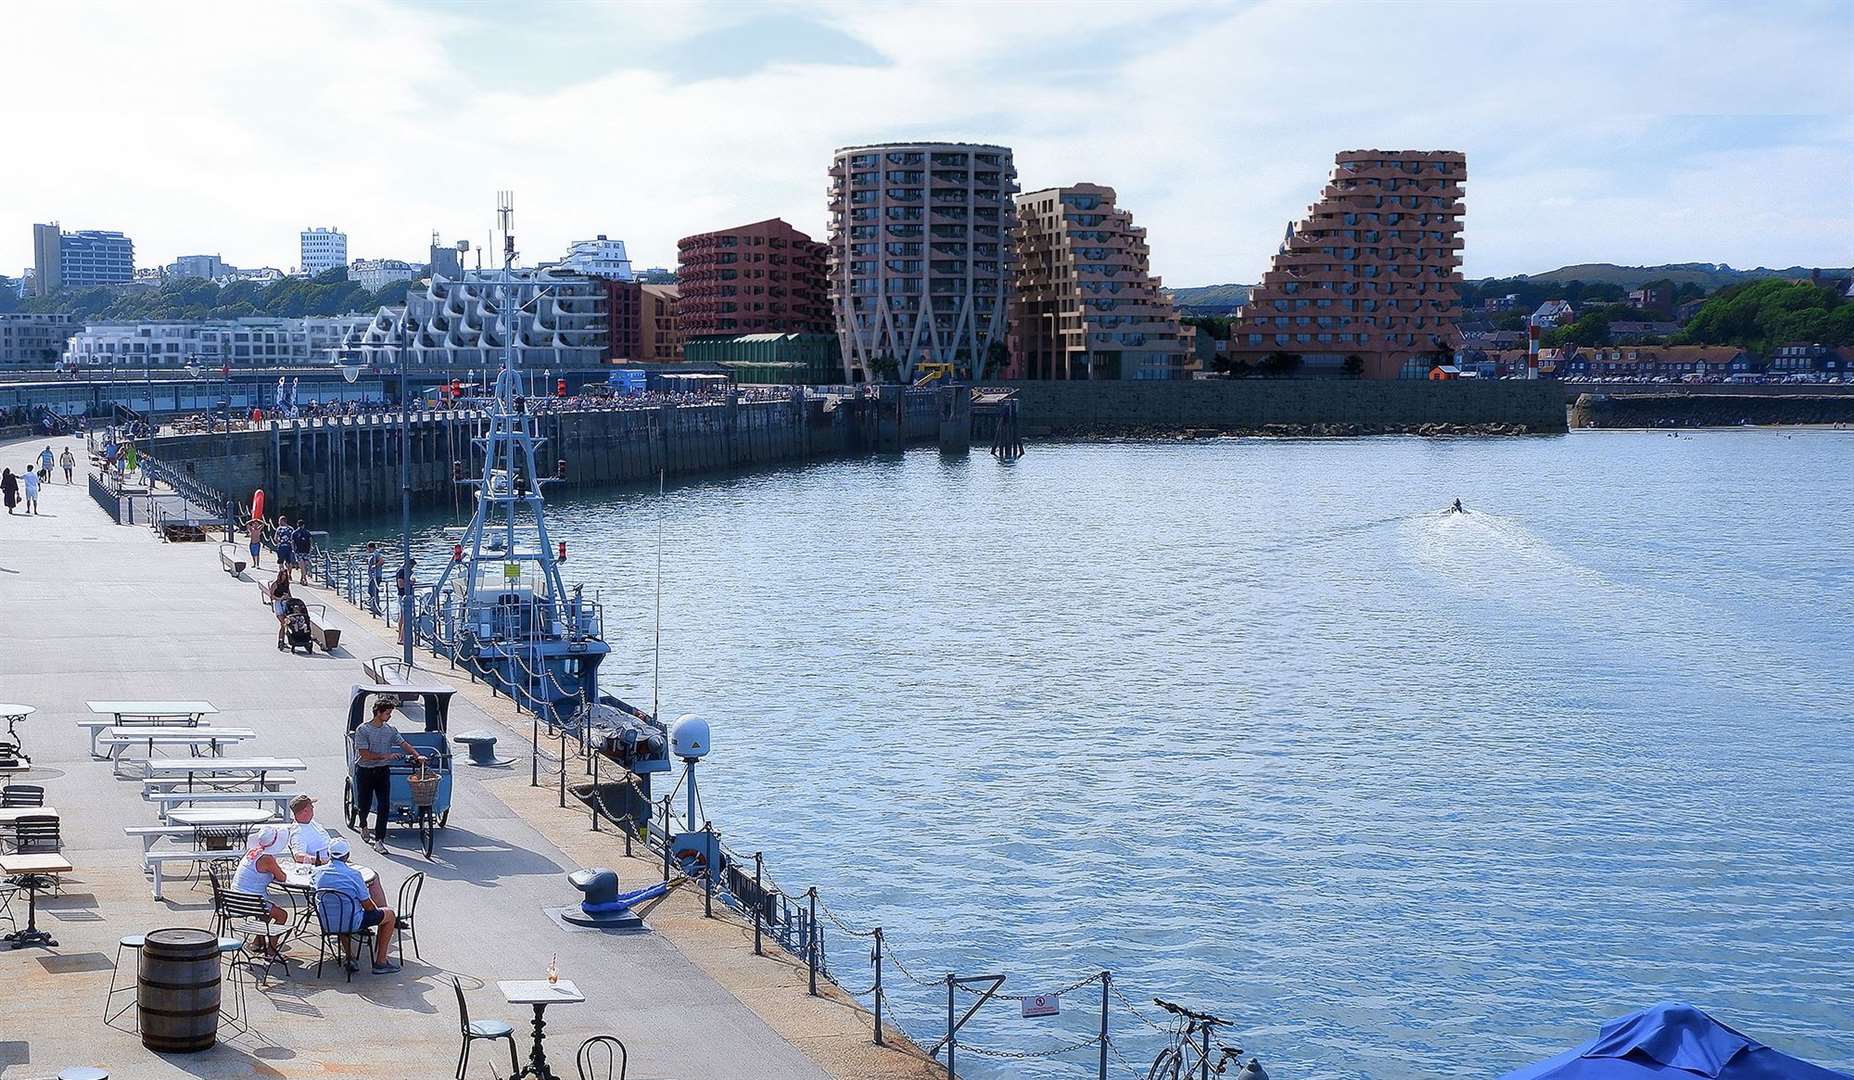 How the new development could look, viewed from the end of the Harbour Arm